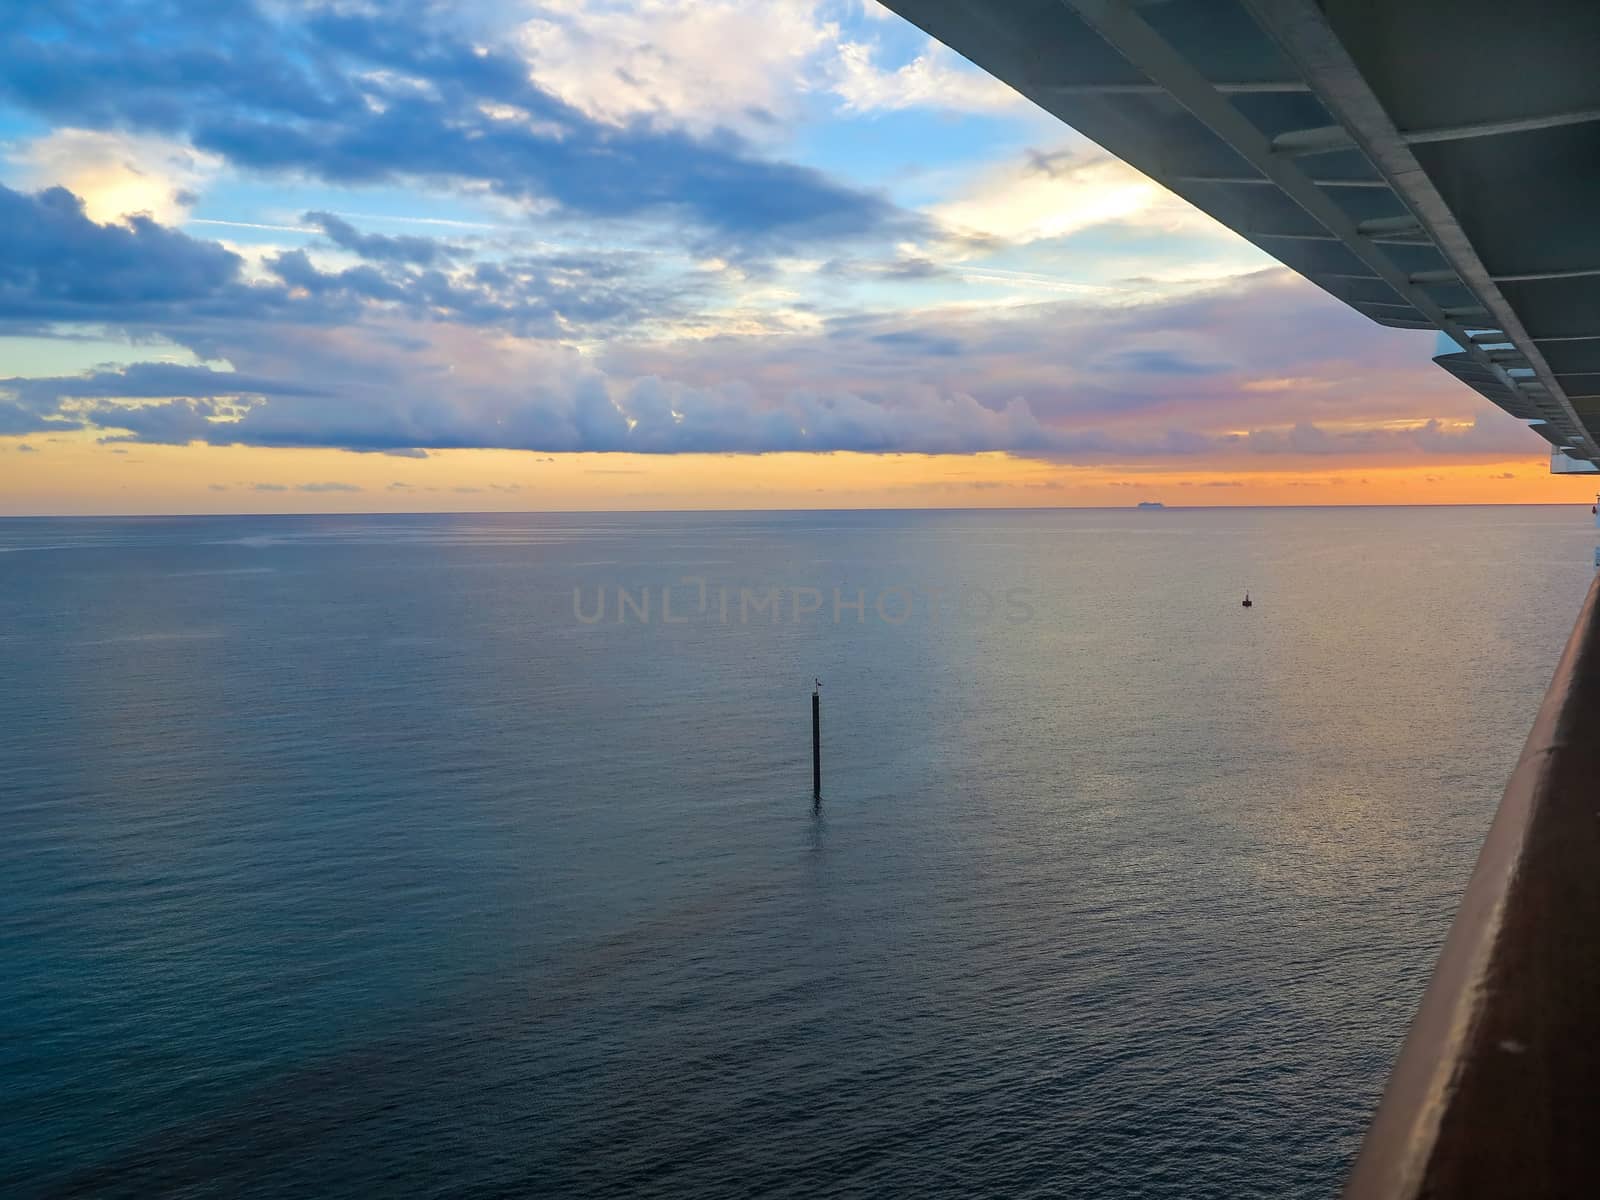 A sunset over the ocean from a cruise ship